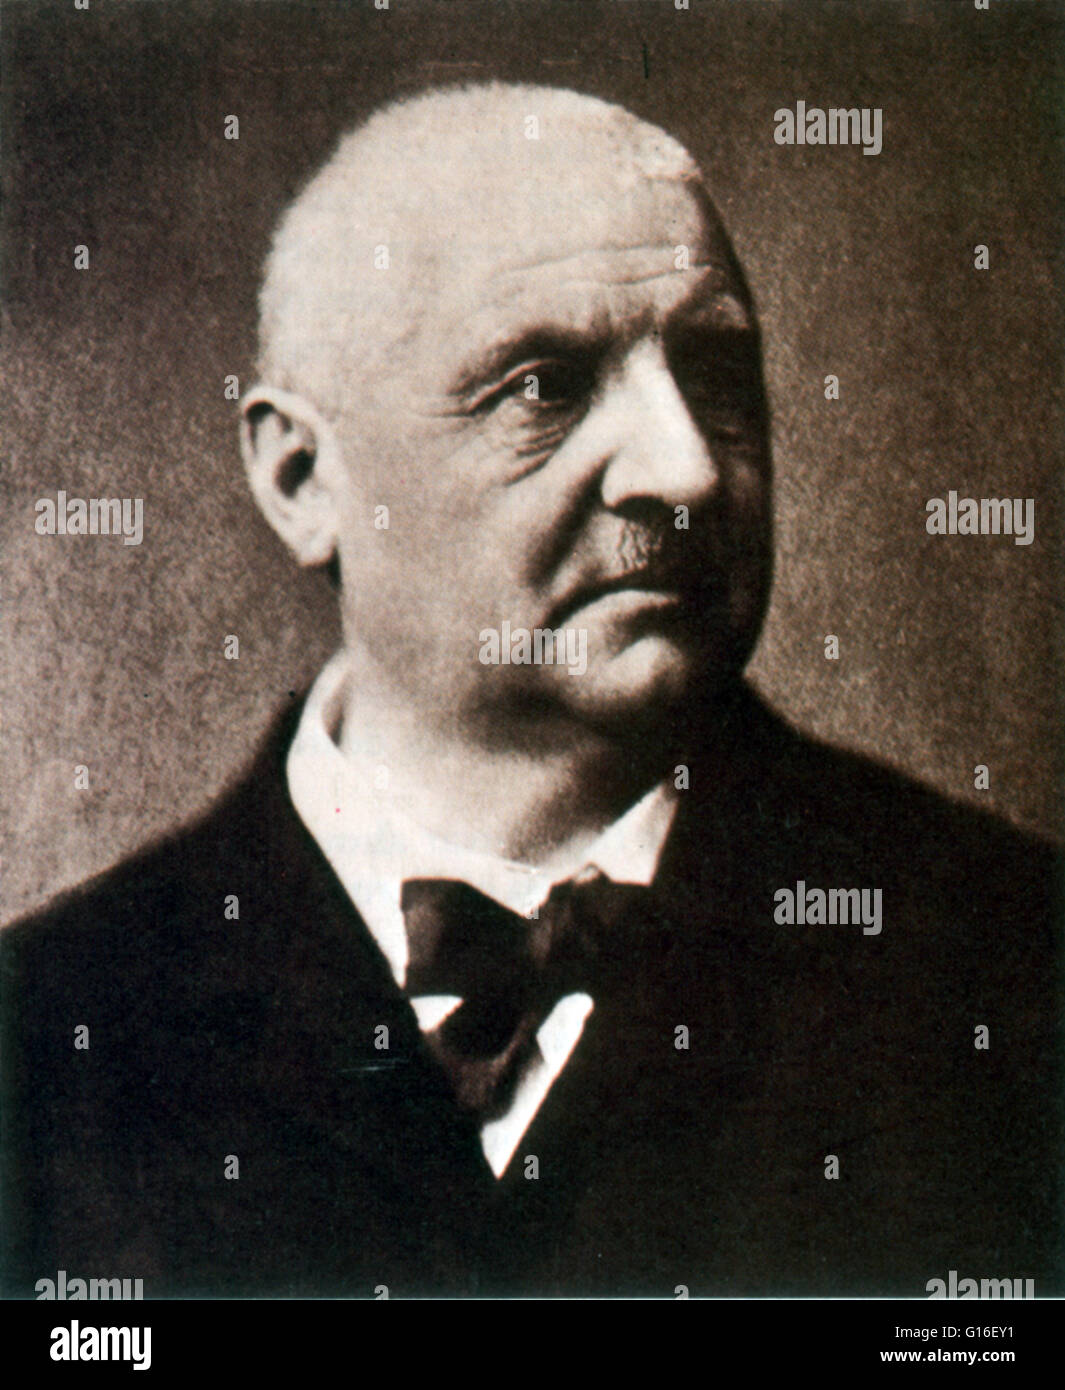 Anton Bruckner (September 4, 1824 - October 11, 1896) was an Austrian composer known for his symphonies, masses, and motets. The first are considered emblematic of the final stage of Austro-German Romanticism because of their rich harmonic language, stron Stock Photo